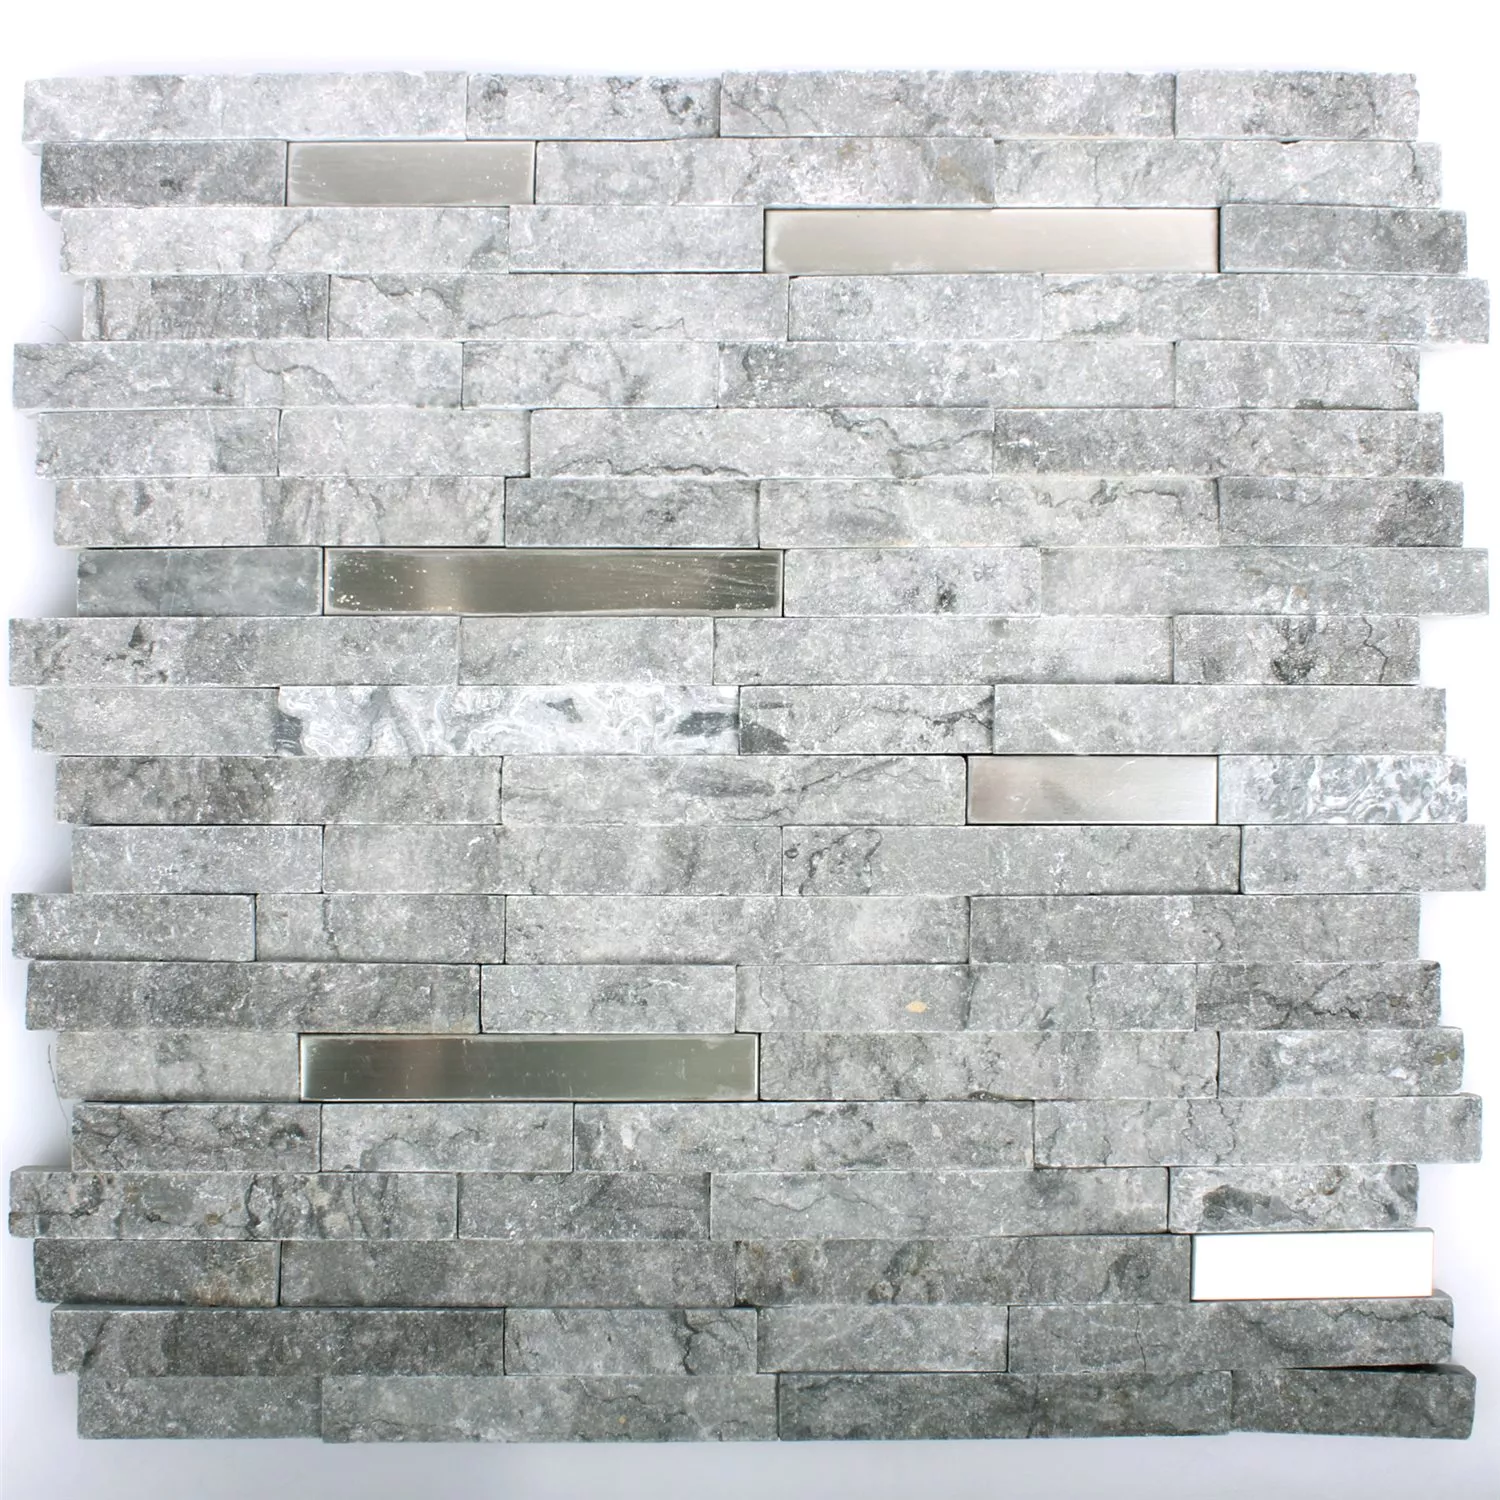 Sample Mosaic Tiles Deepstone Natural Stone Stainless Steel Grey 3D